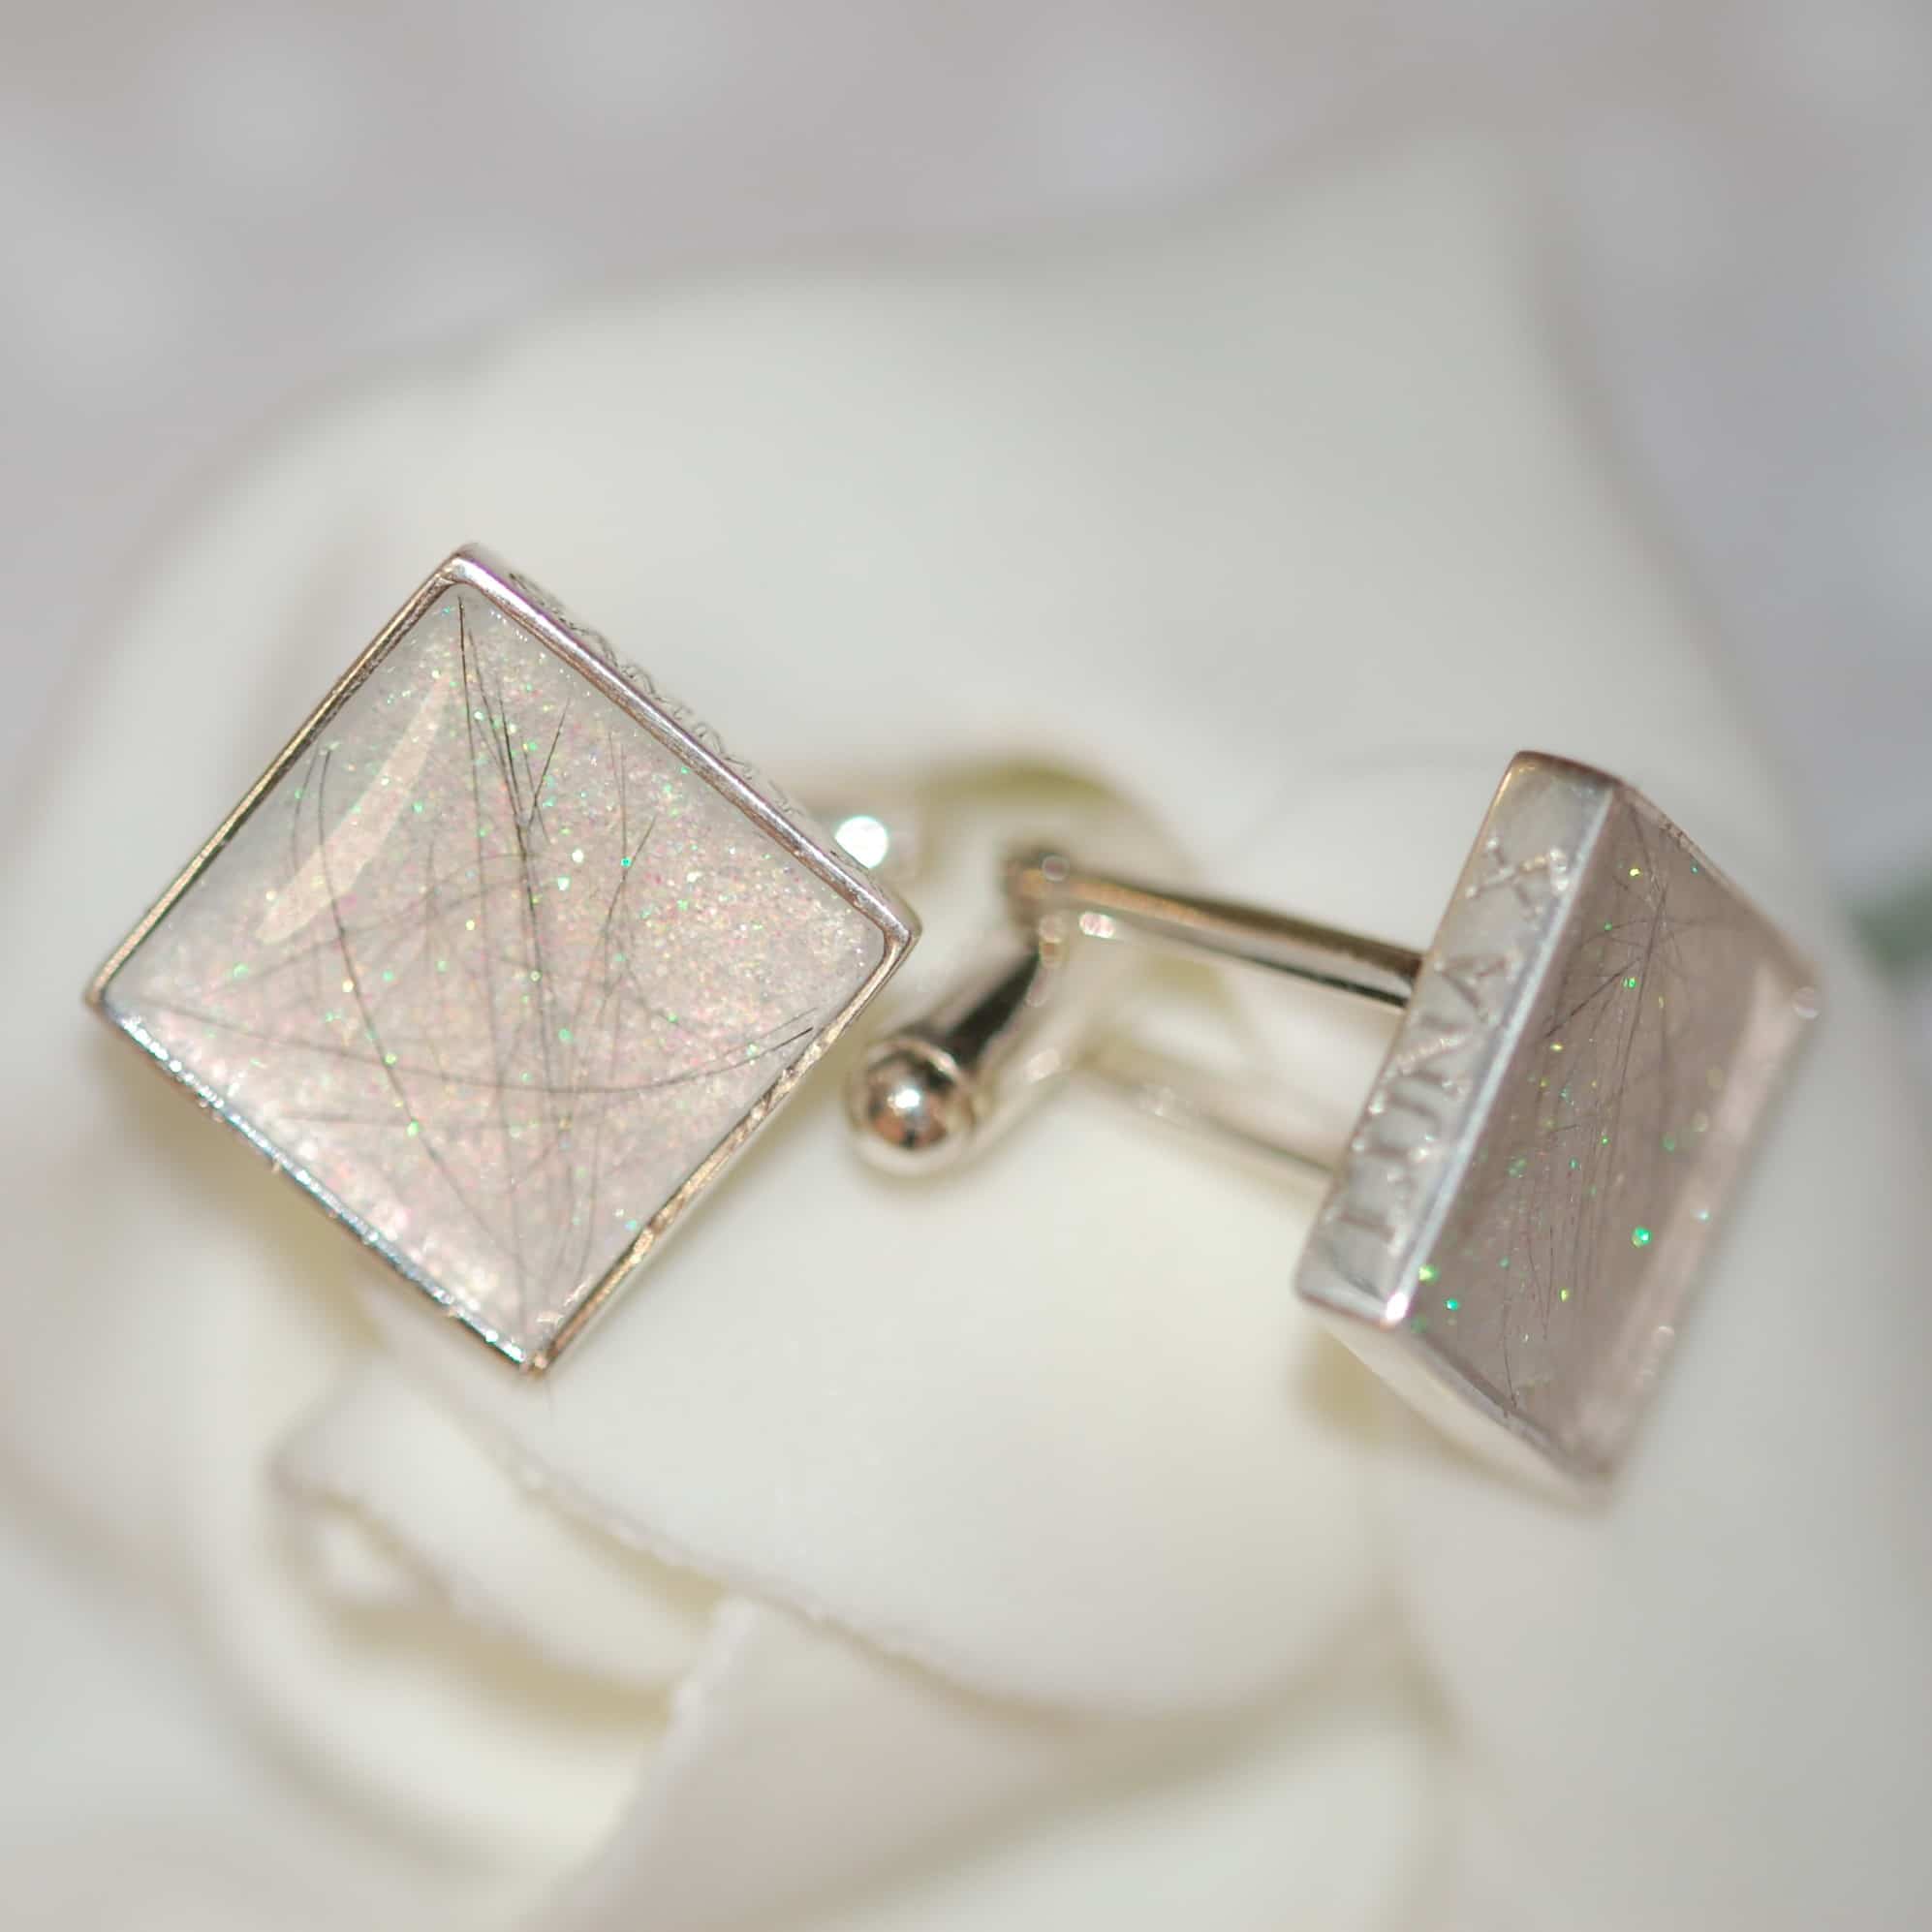 Silver cufflinks with pet fur or cremation ashes